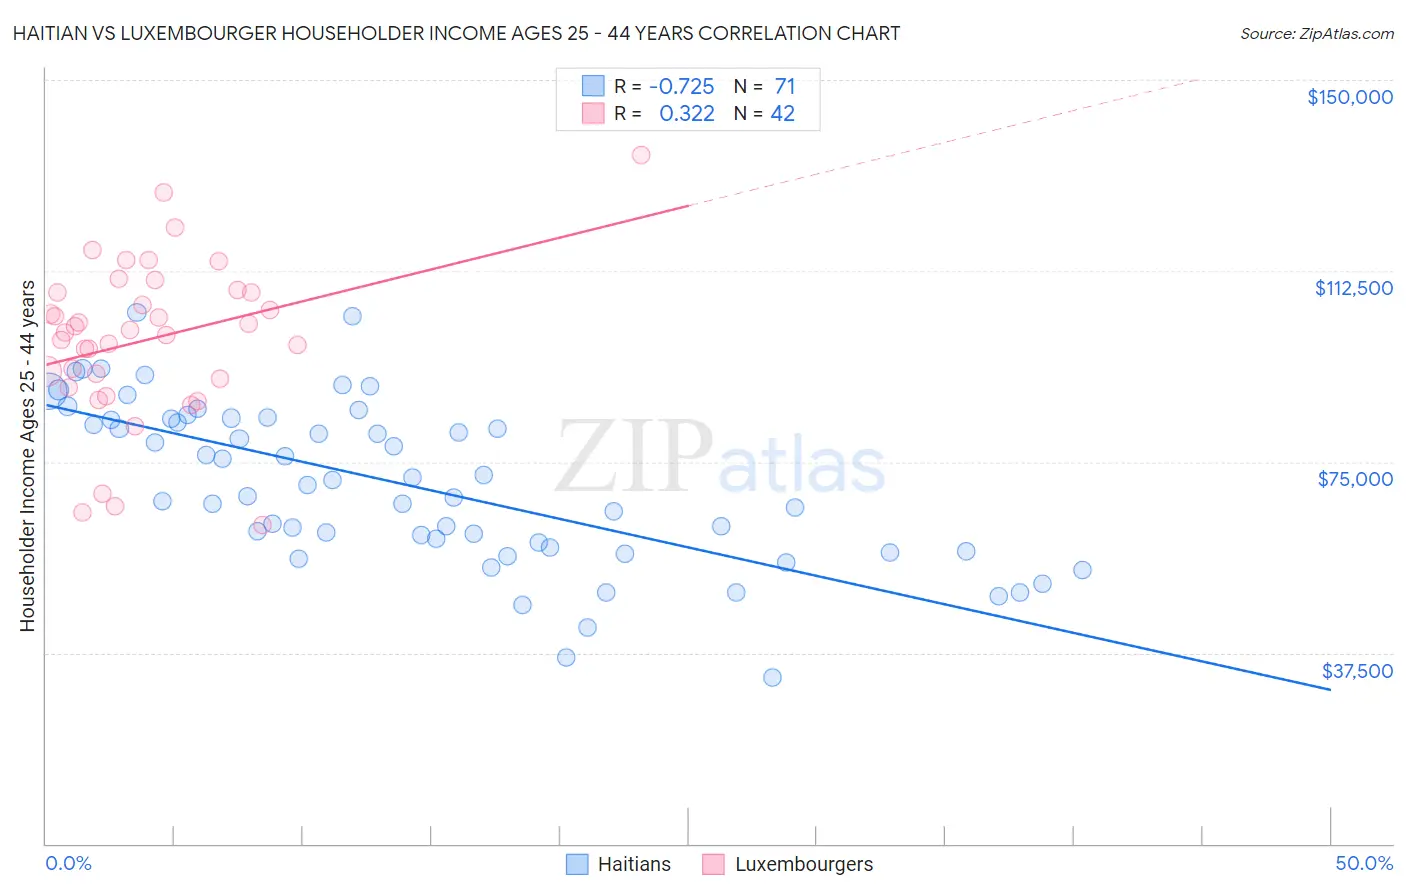 Haitian vs Luxembourger Householder Income Ages 25 - 44 years